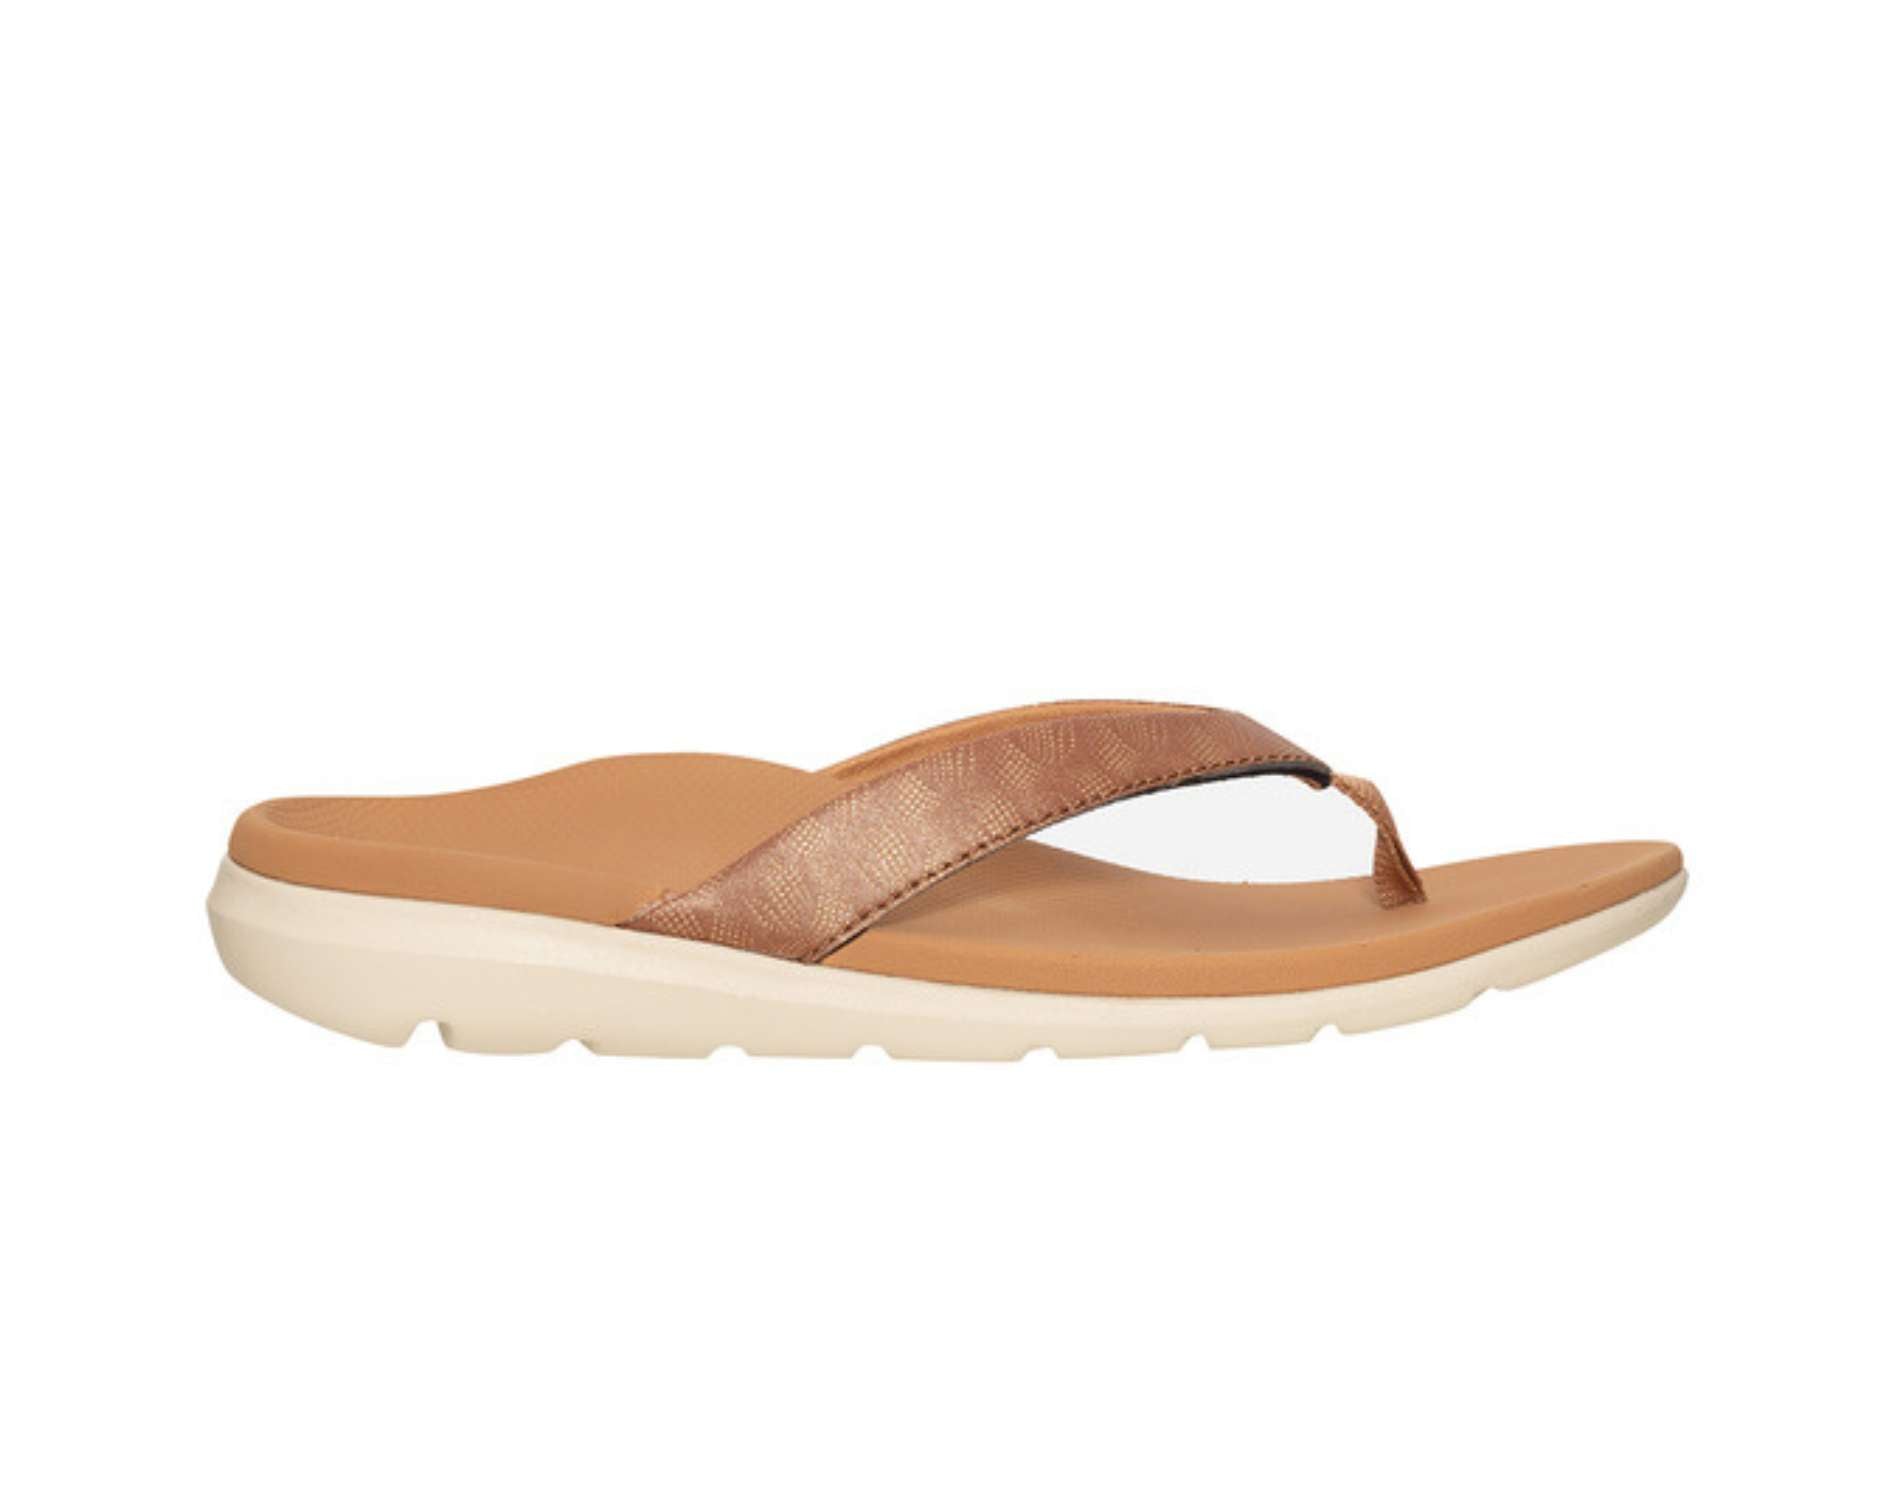 Ascent's Groove sandals for women in caramel colour